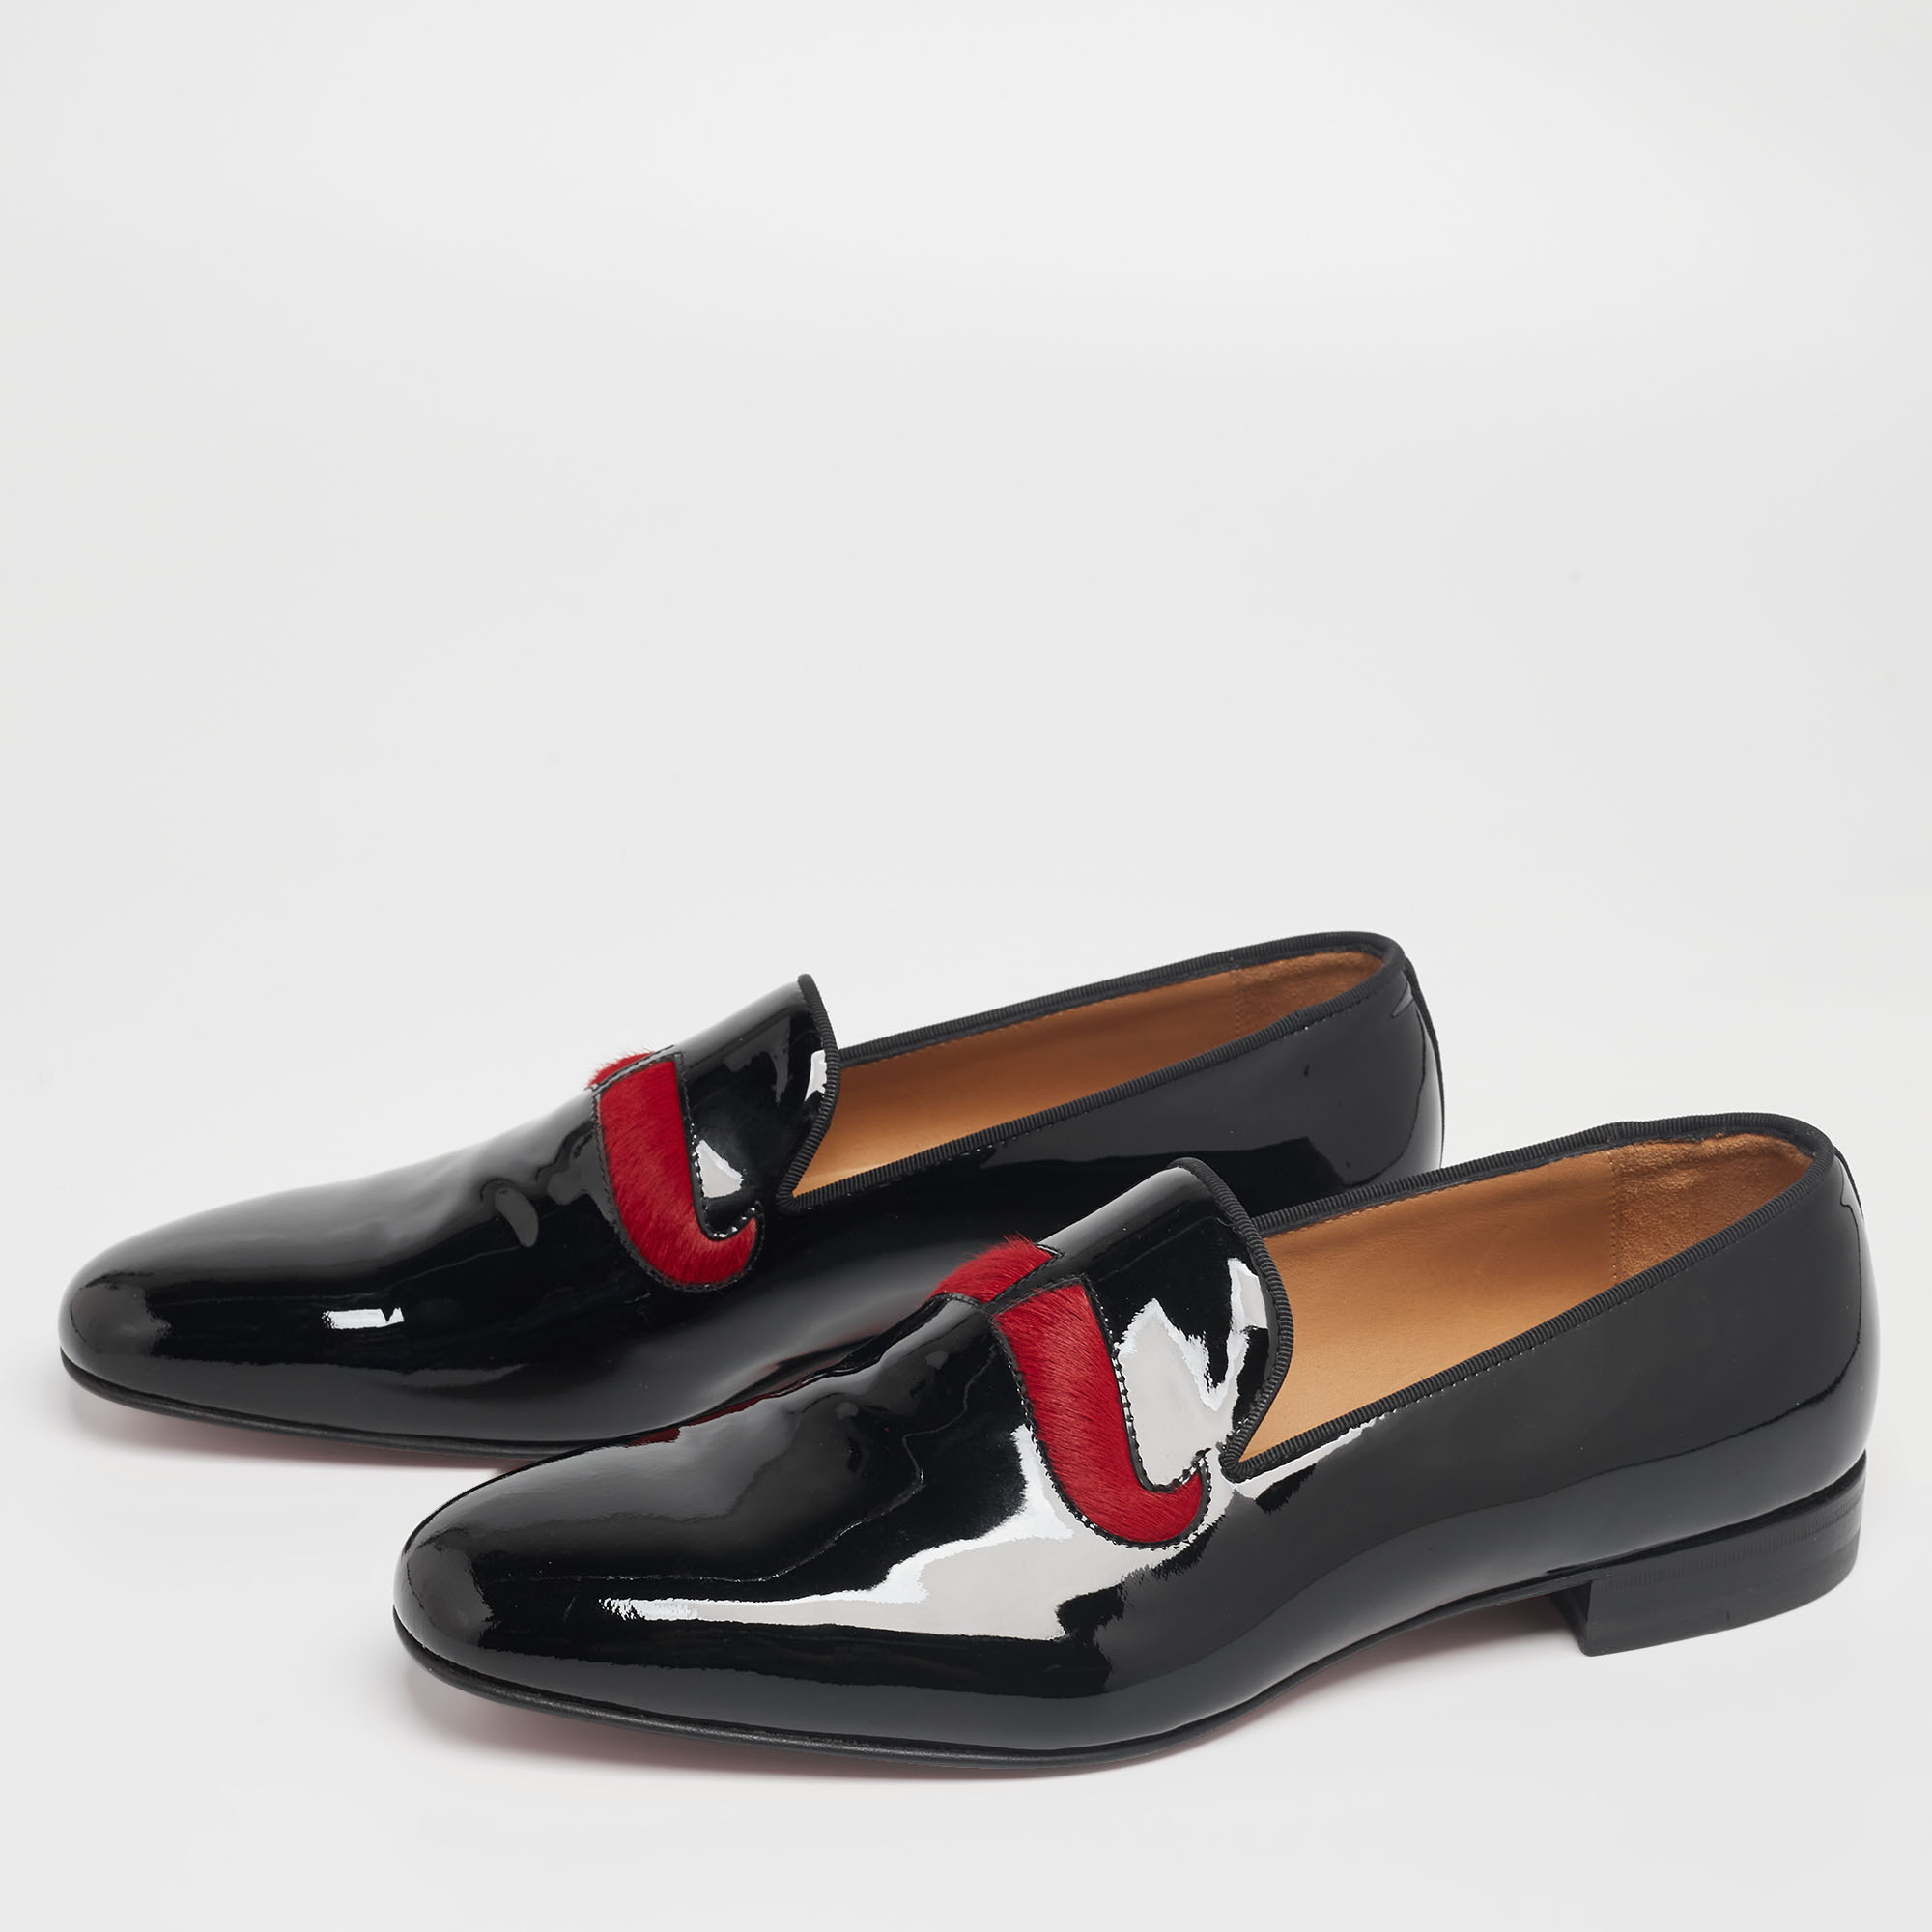 

Christian Louboutin Black/Red Patent Leather and Calf Hair Mustache Smoking Slippers Size